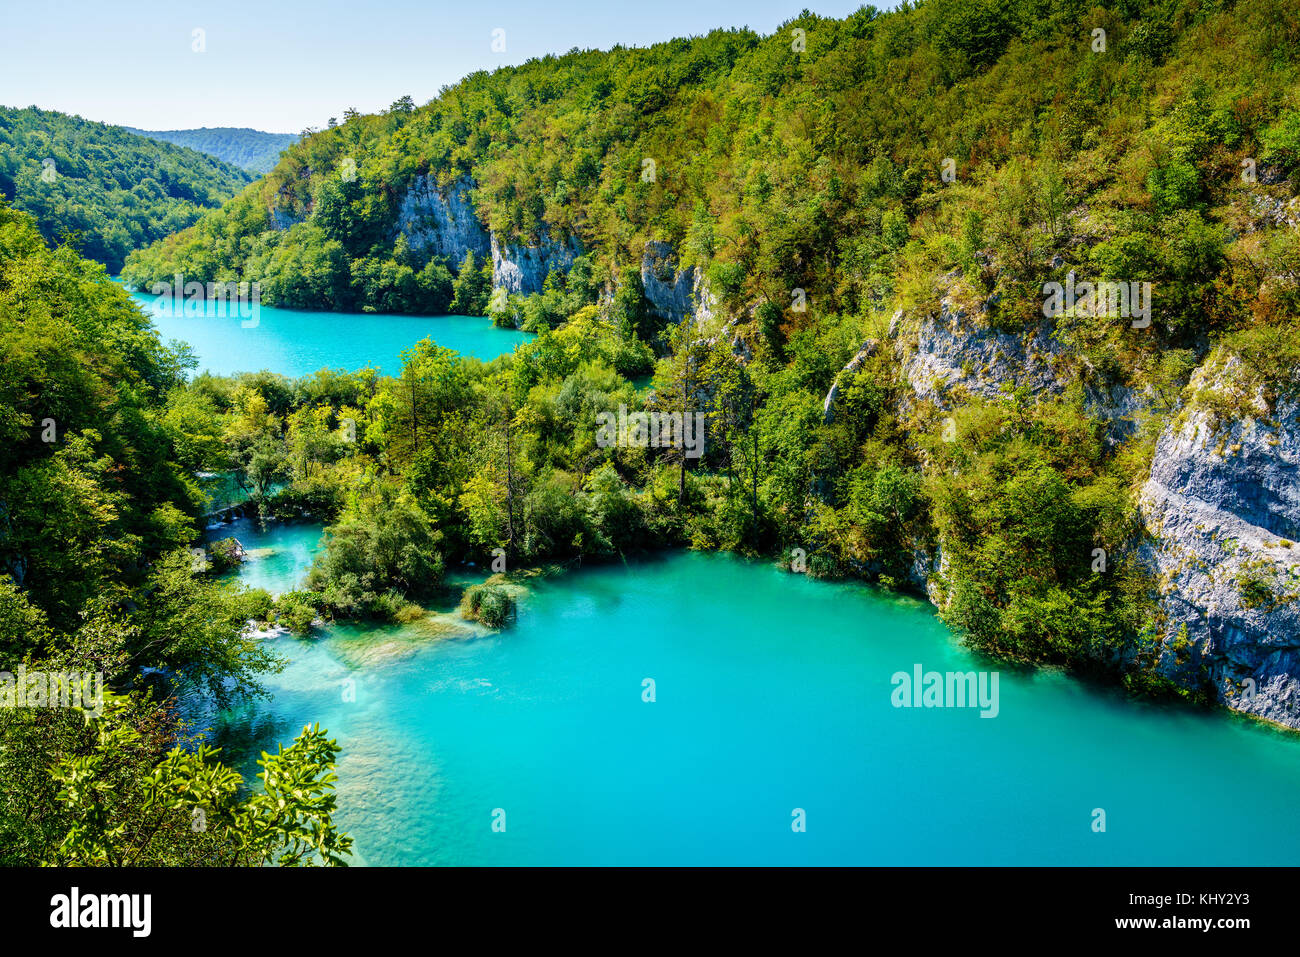 Bird's eye view of the Lower Lakes at Plitvice Lakes National Park in Croatia Stock Photo